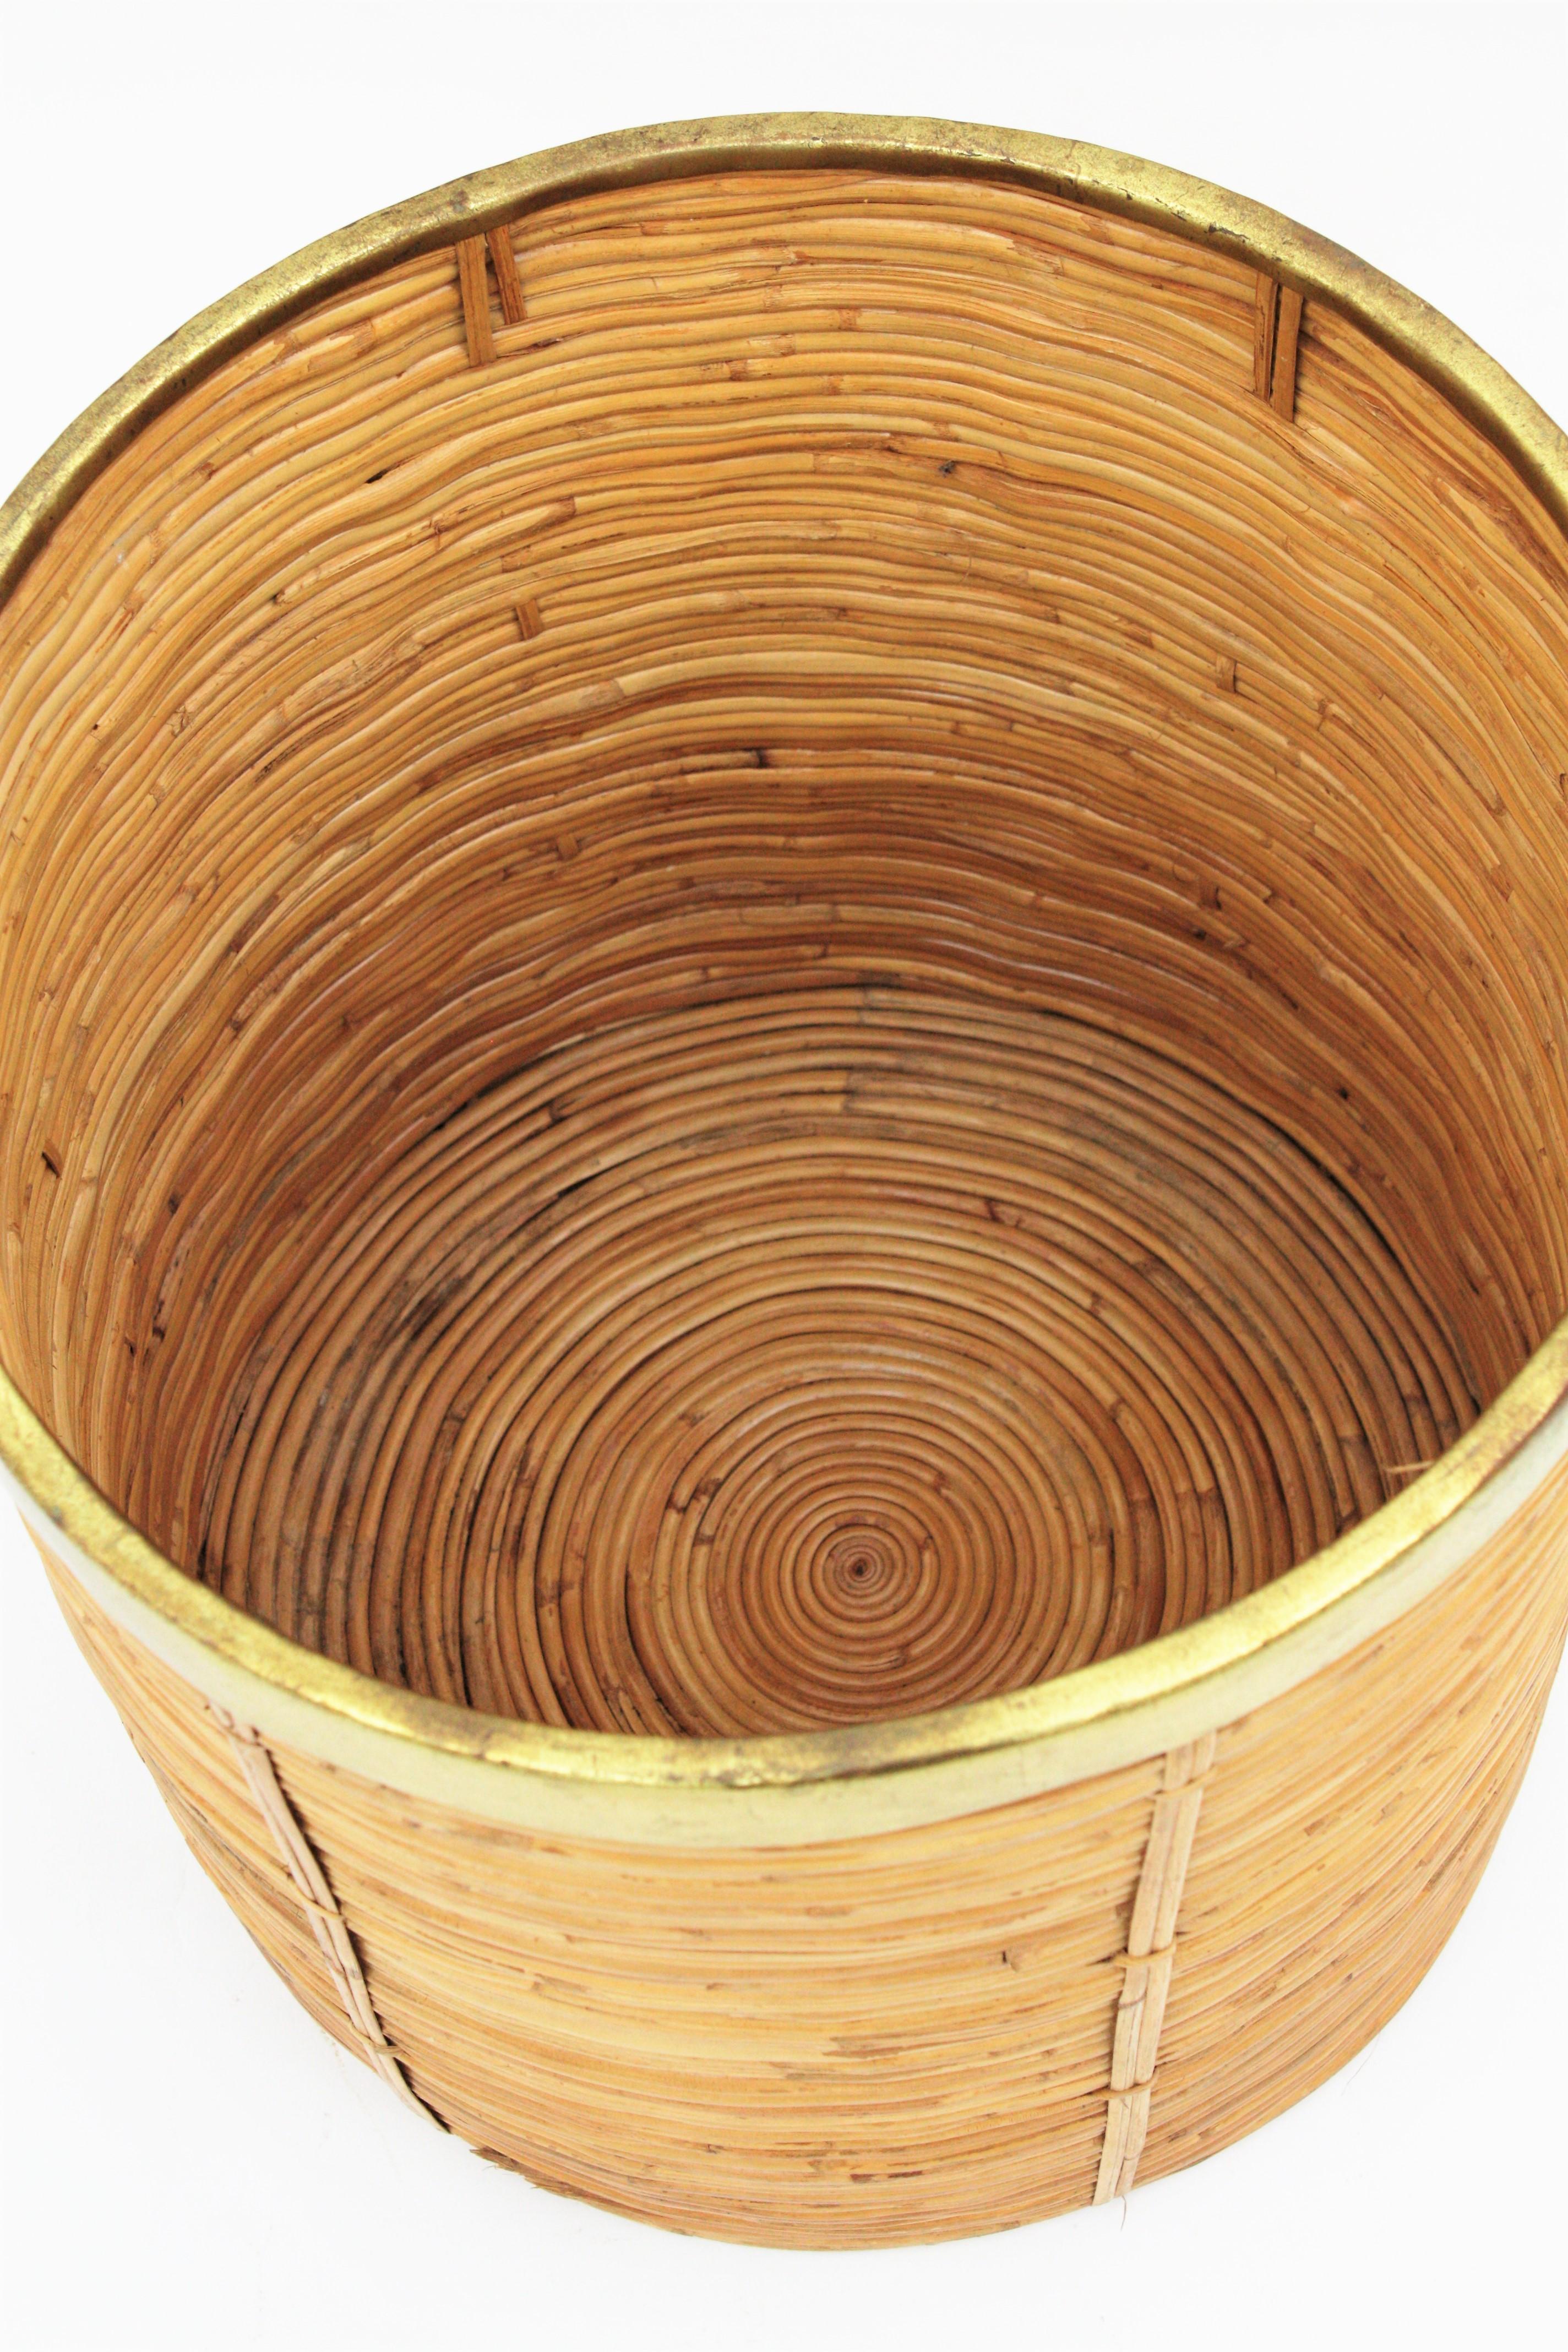 20th Century Large Midcentury Gabriella Crespi Style Brass and Rattan Bamboo Round Planter